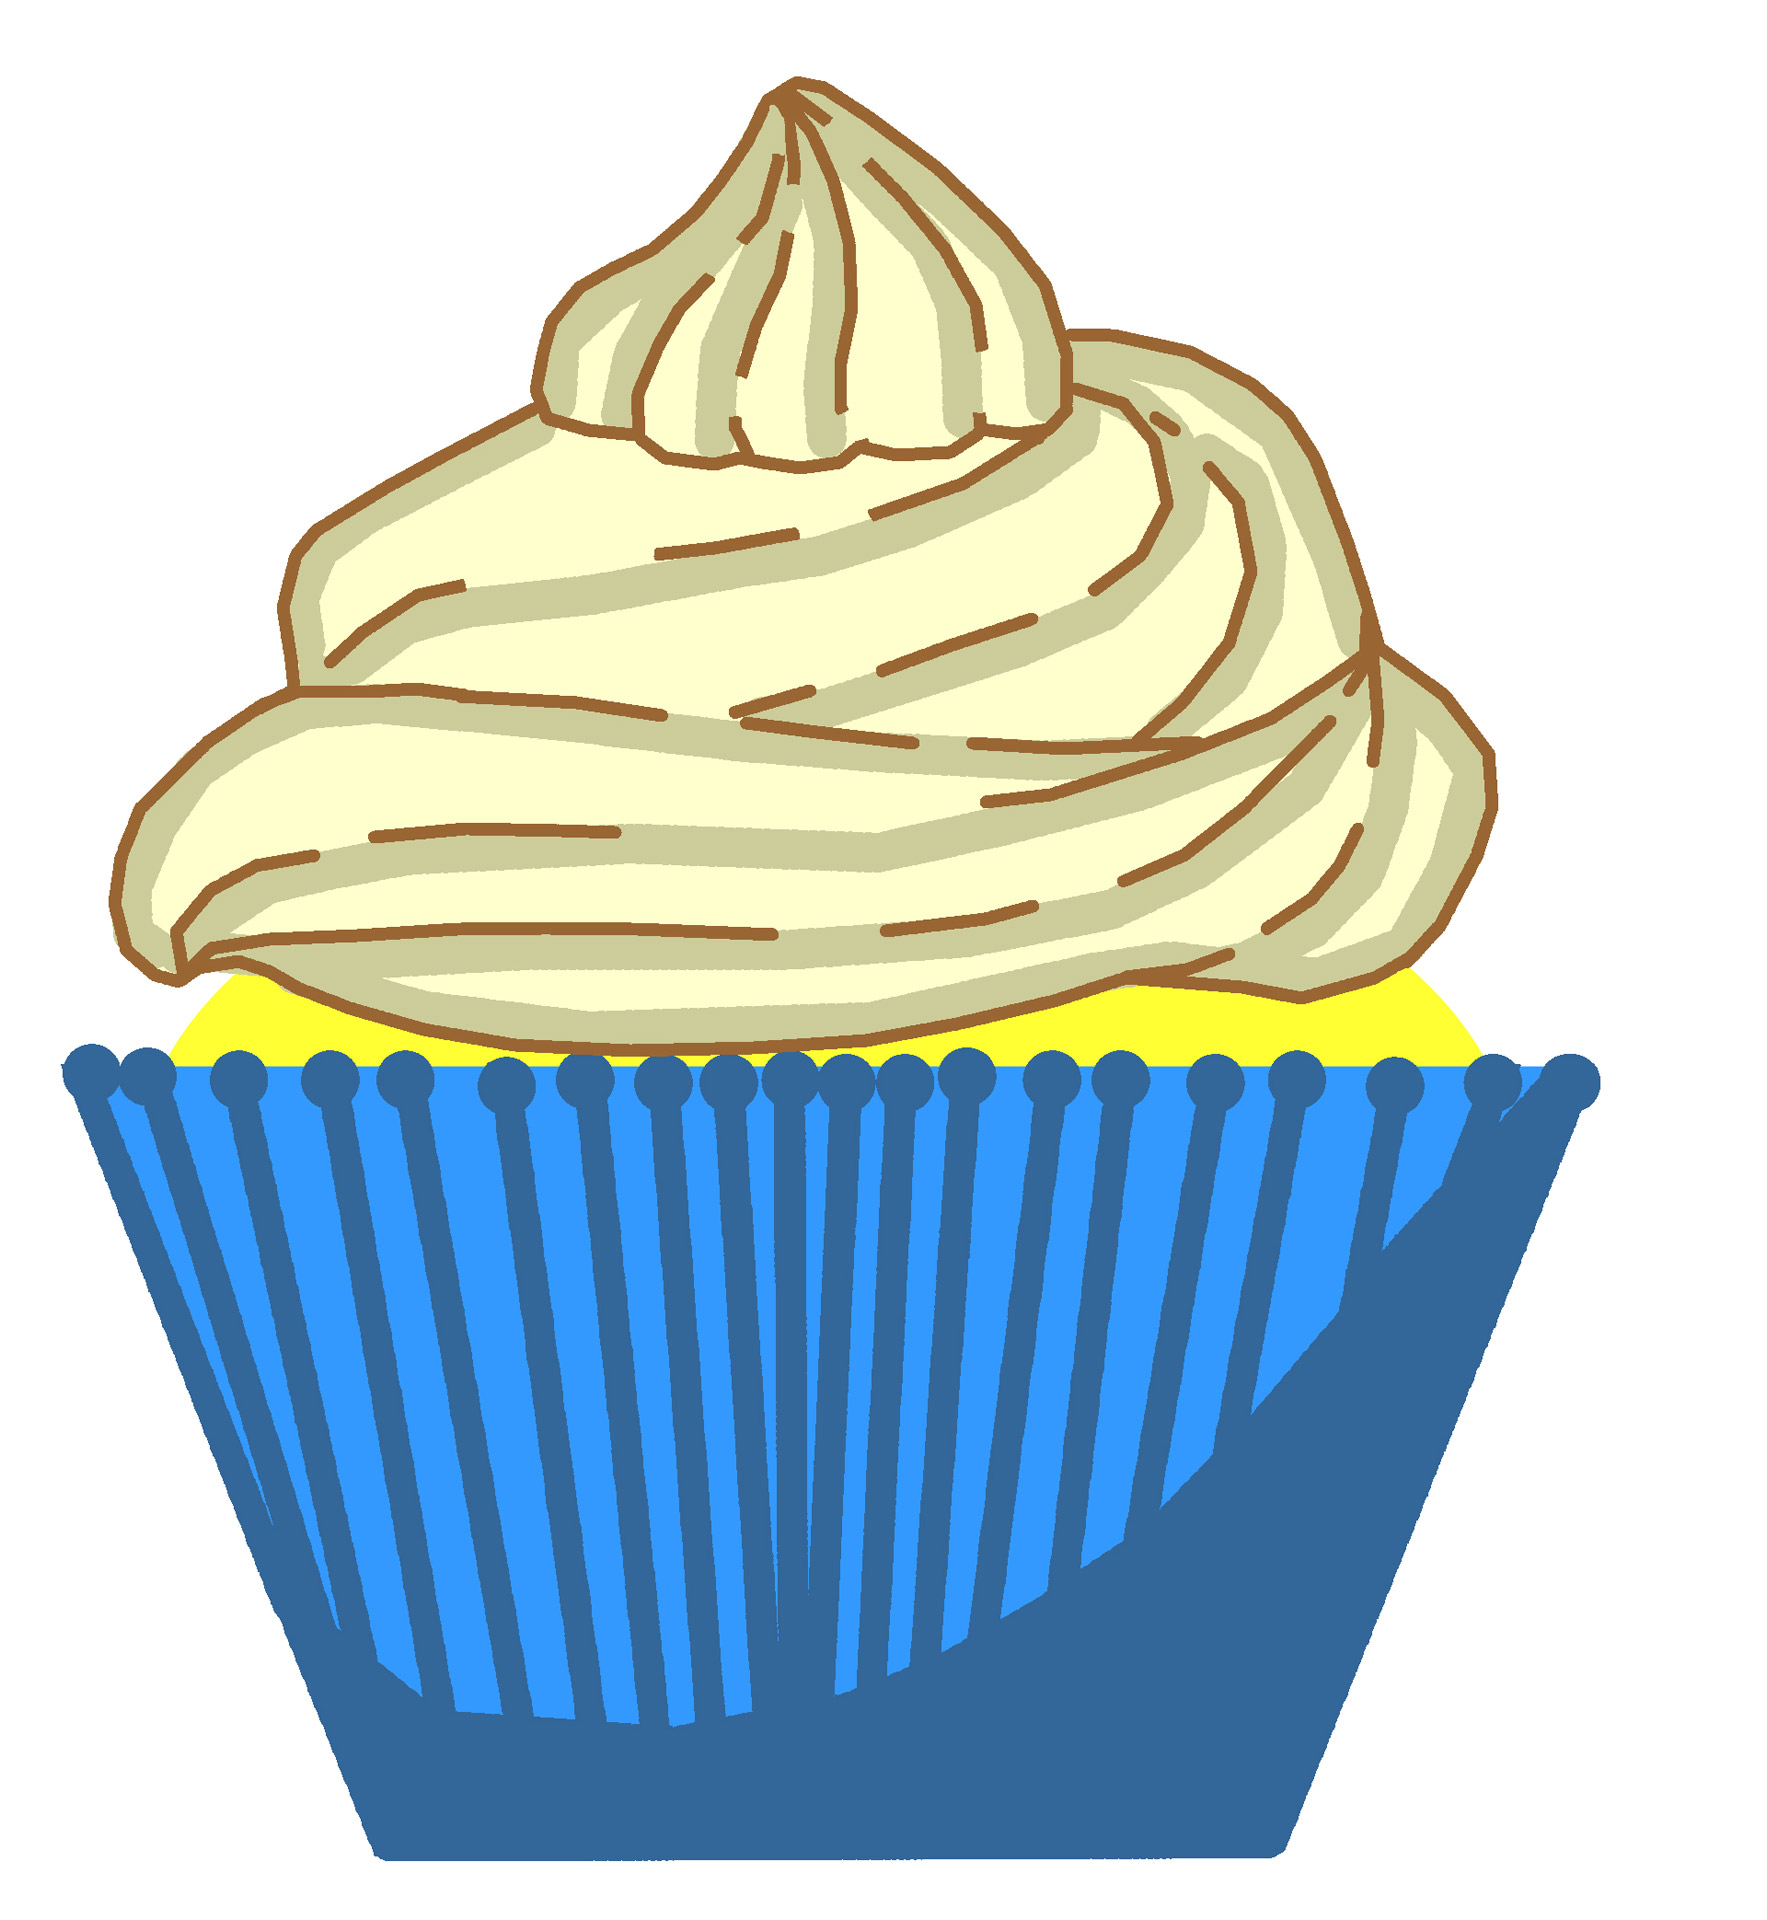 Free Cup Cake Clipart, Download Free Cup Cake Clipart png images, Free